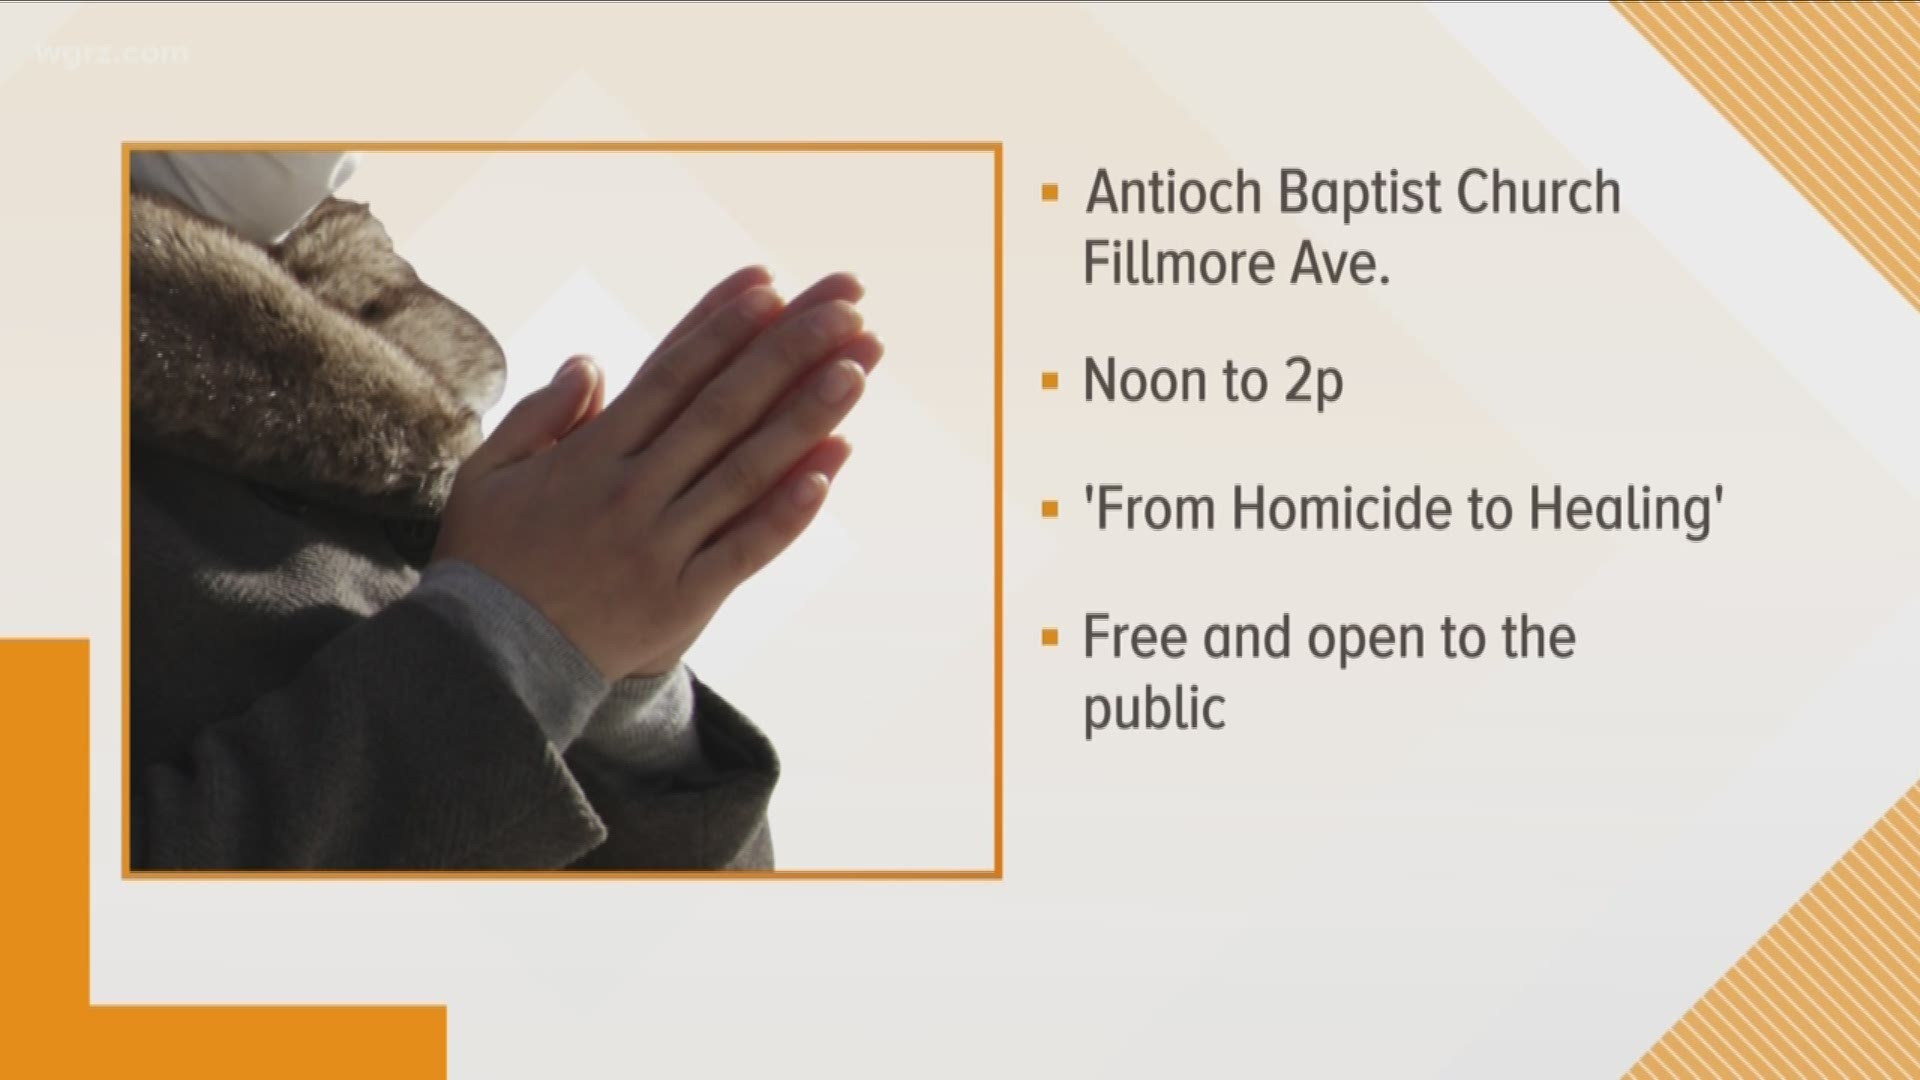 The event will be at the Antioch Baptist Church on Fillmore Avenue, and it starts at noon.